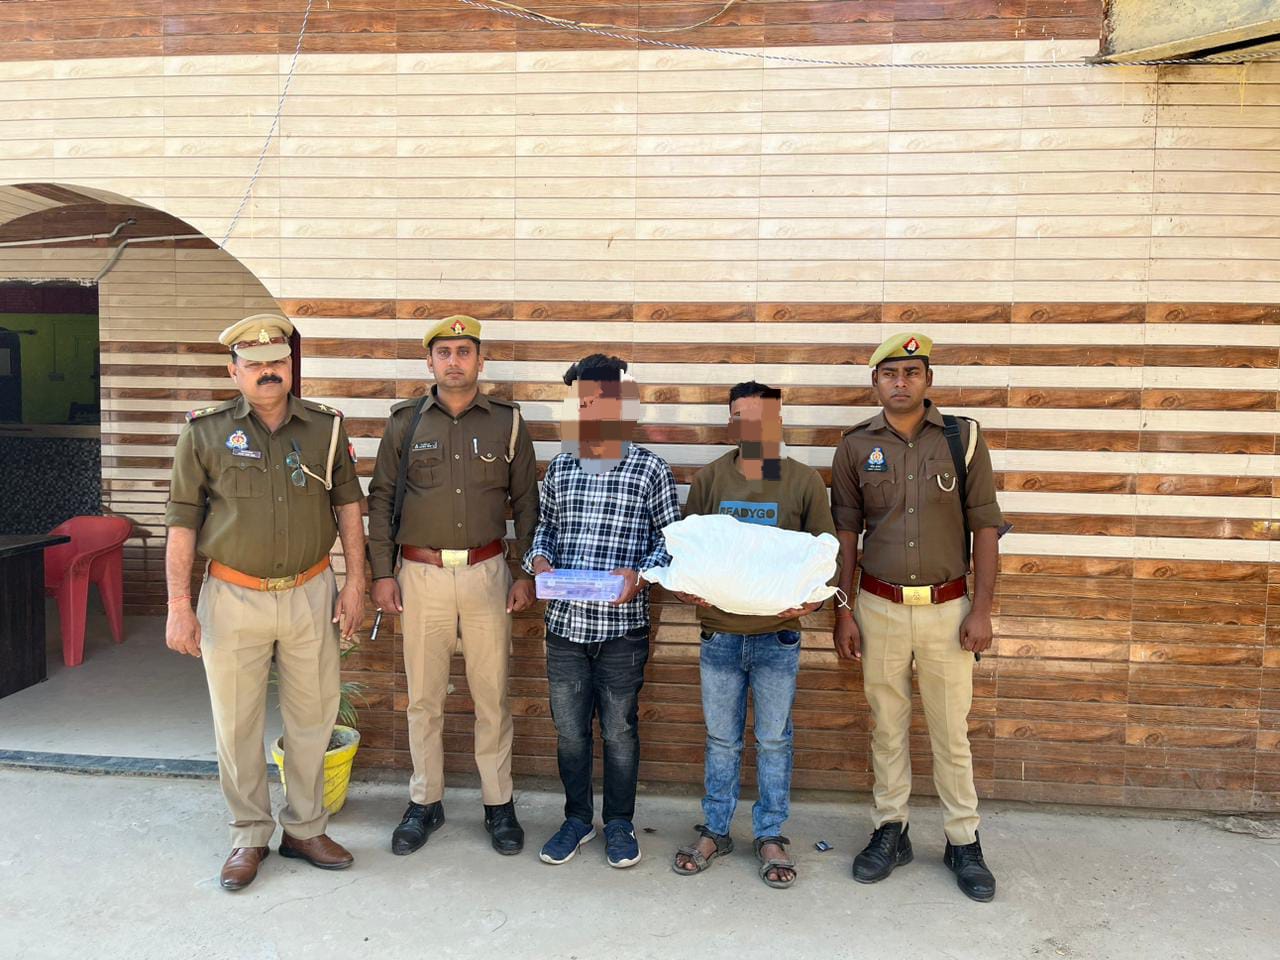 Ganja worth Rs 1.5 lakh and illegal pistol recovered